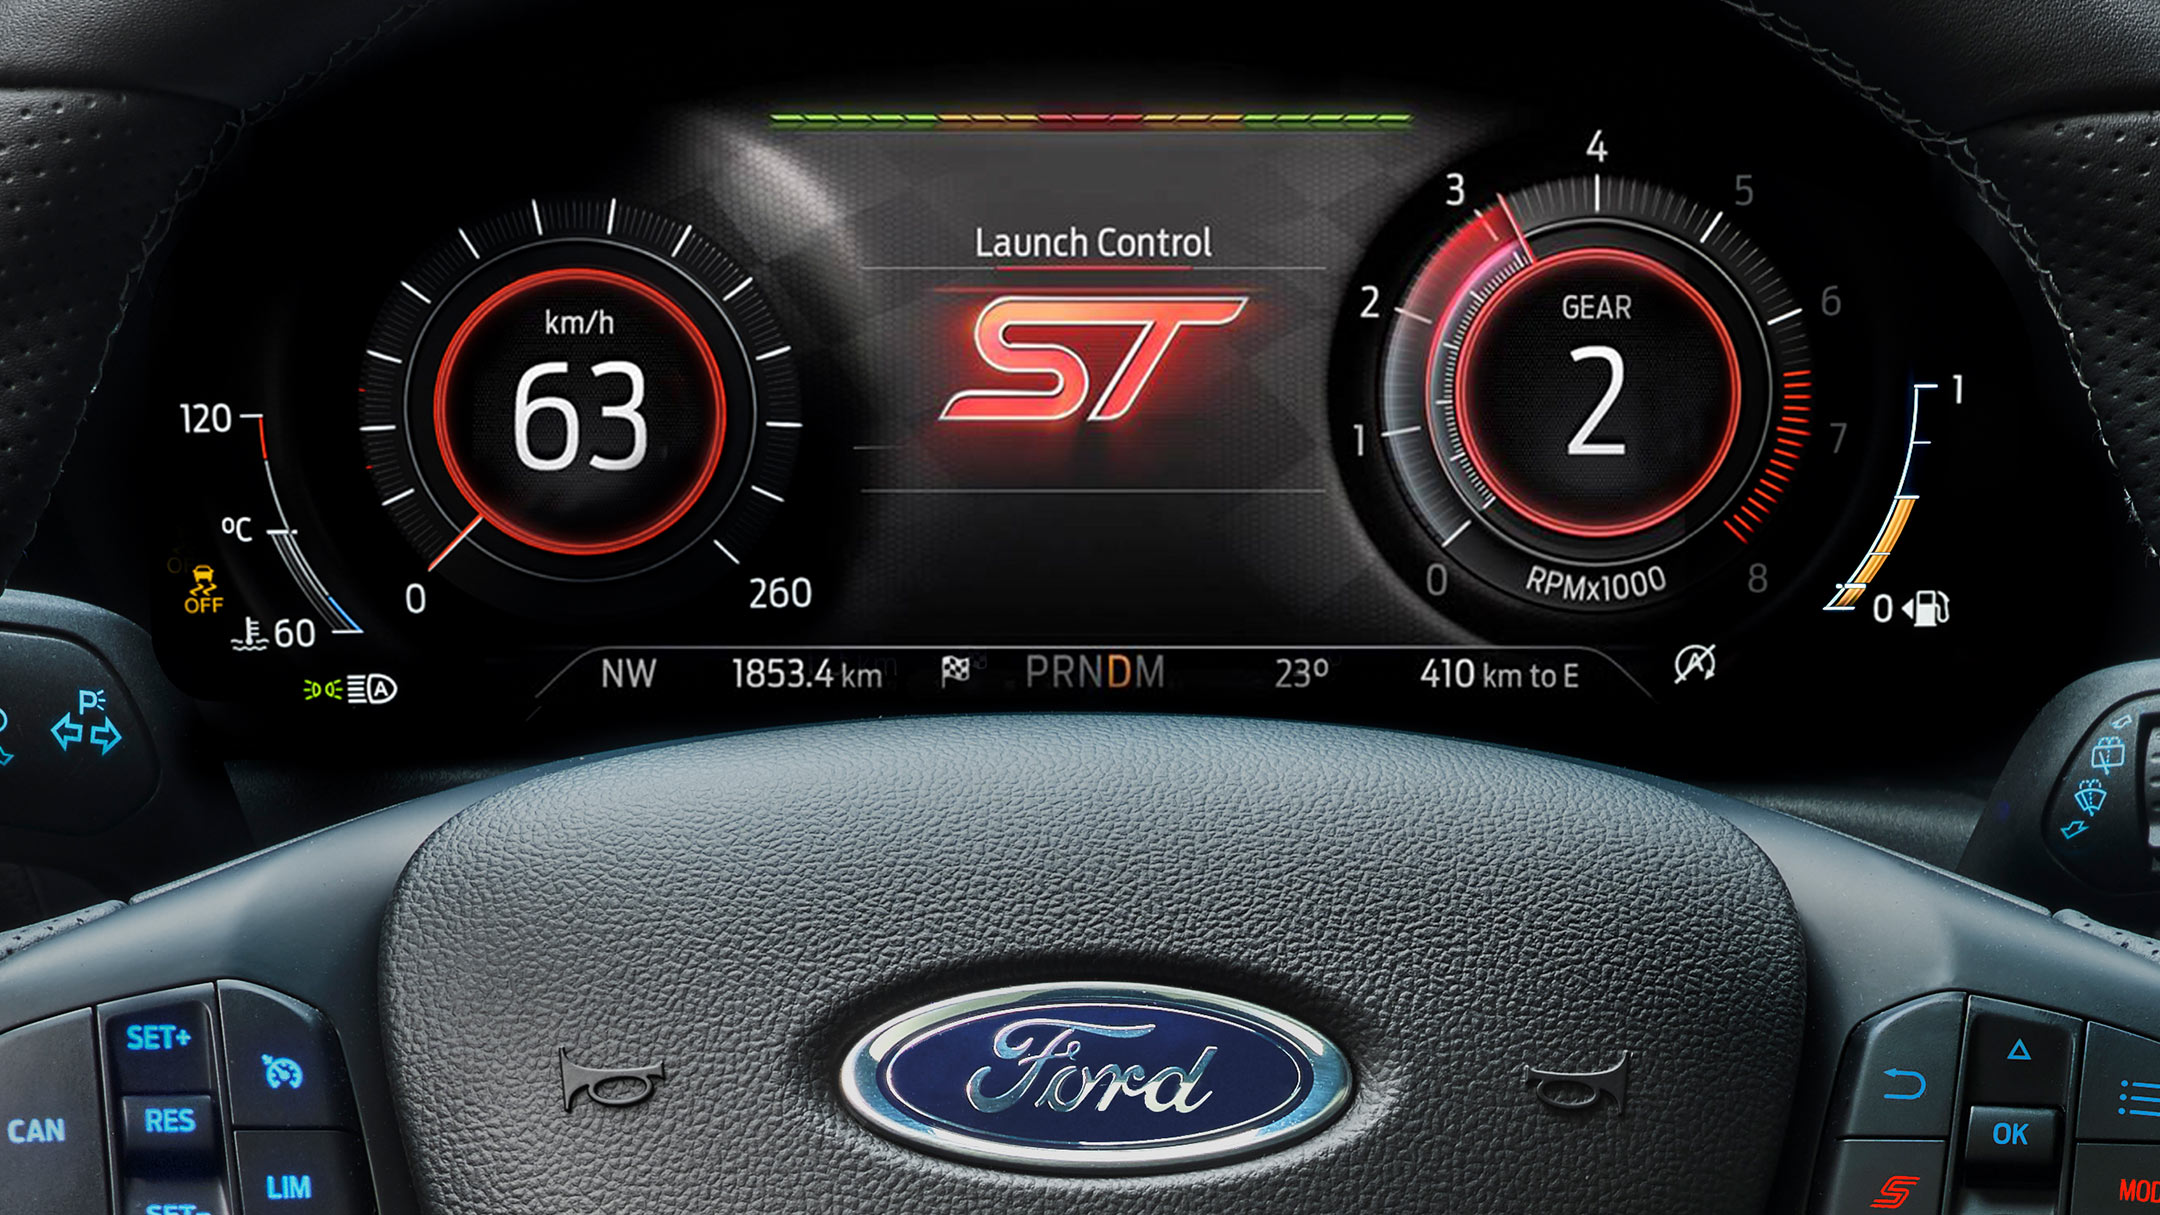 Ford Focus ST – Launch Control.